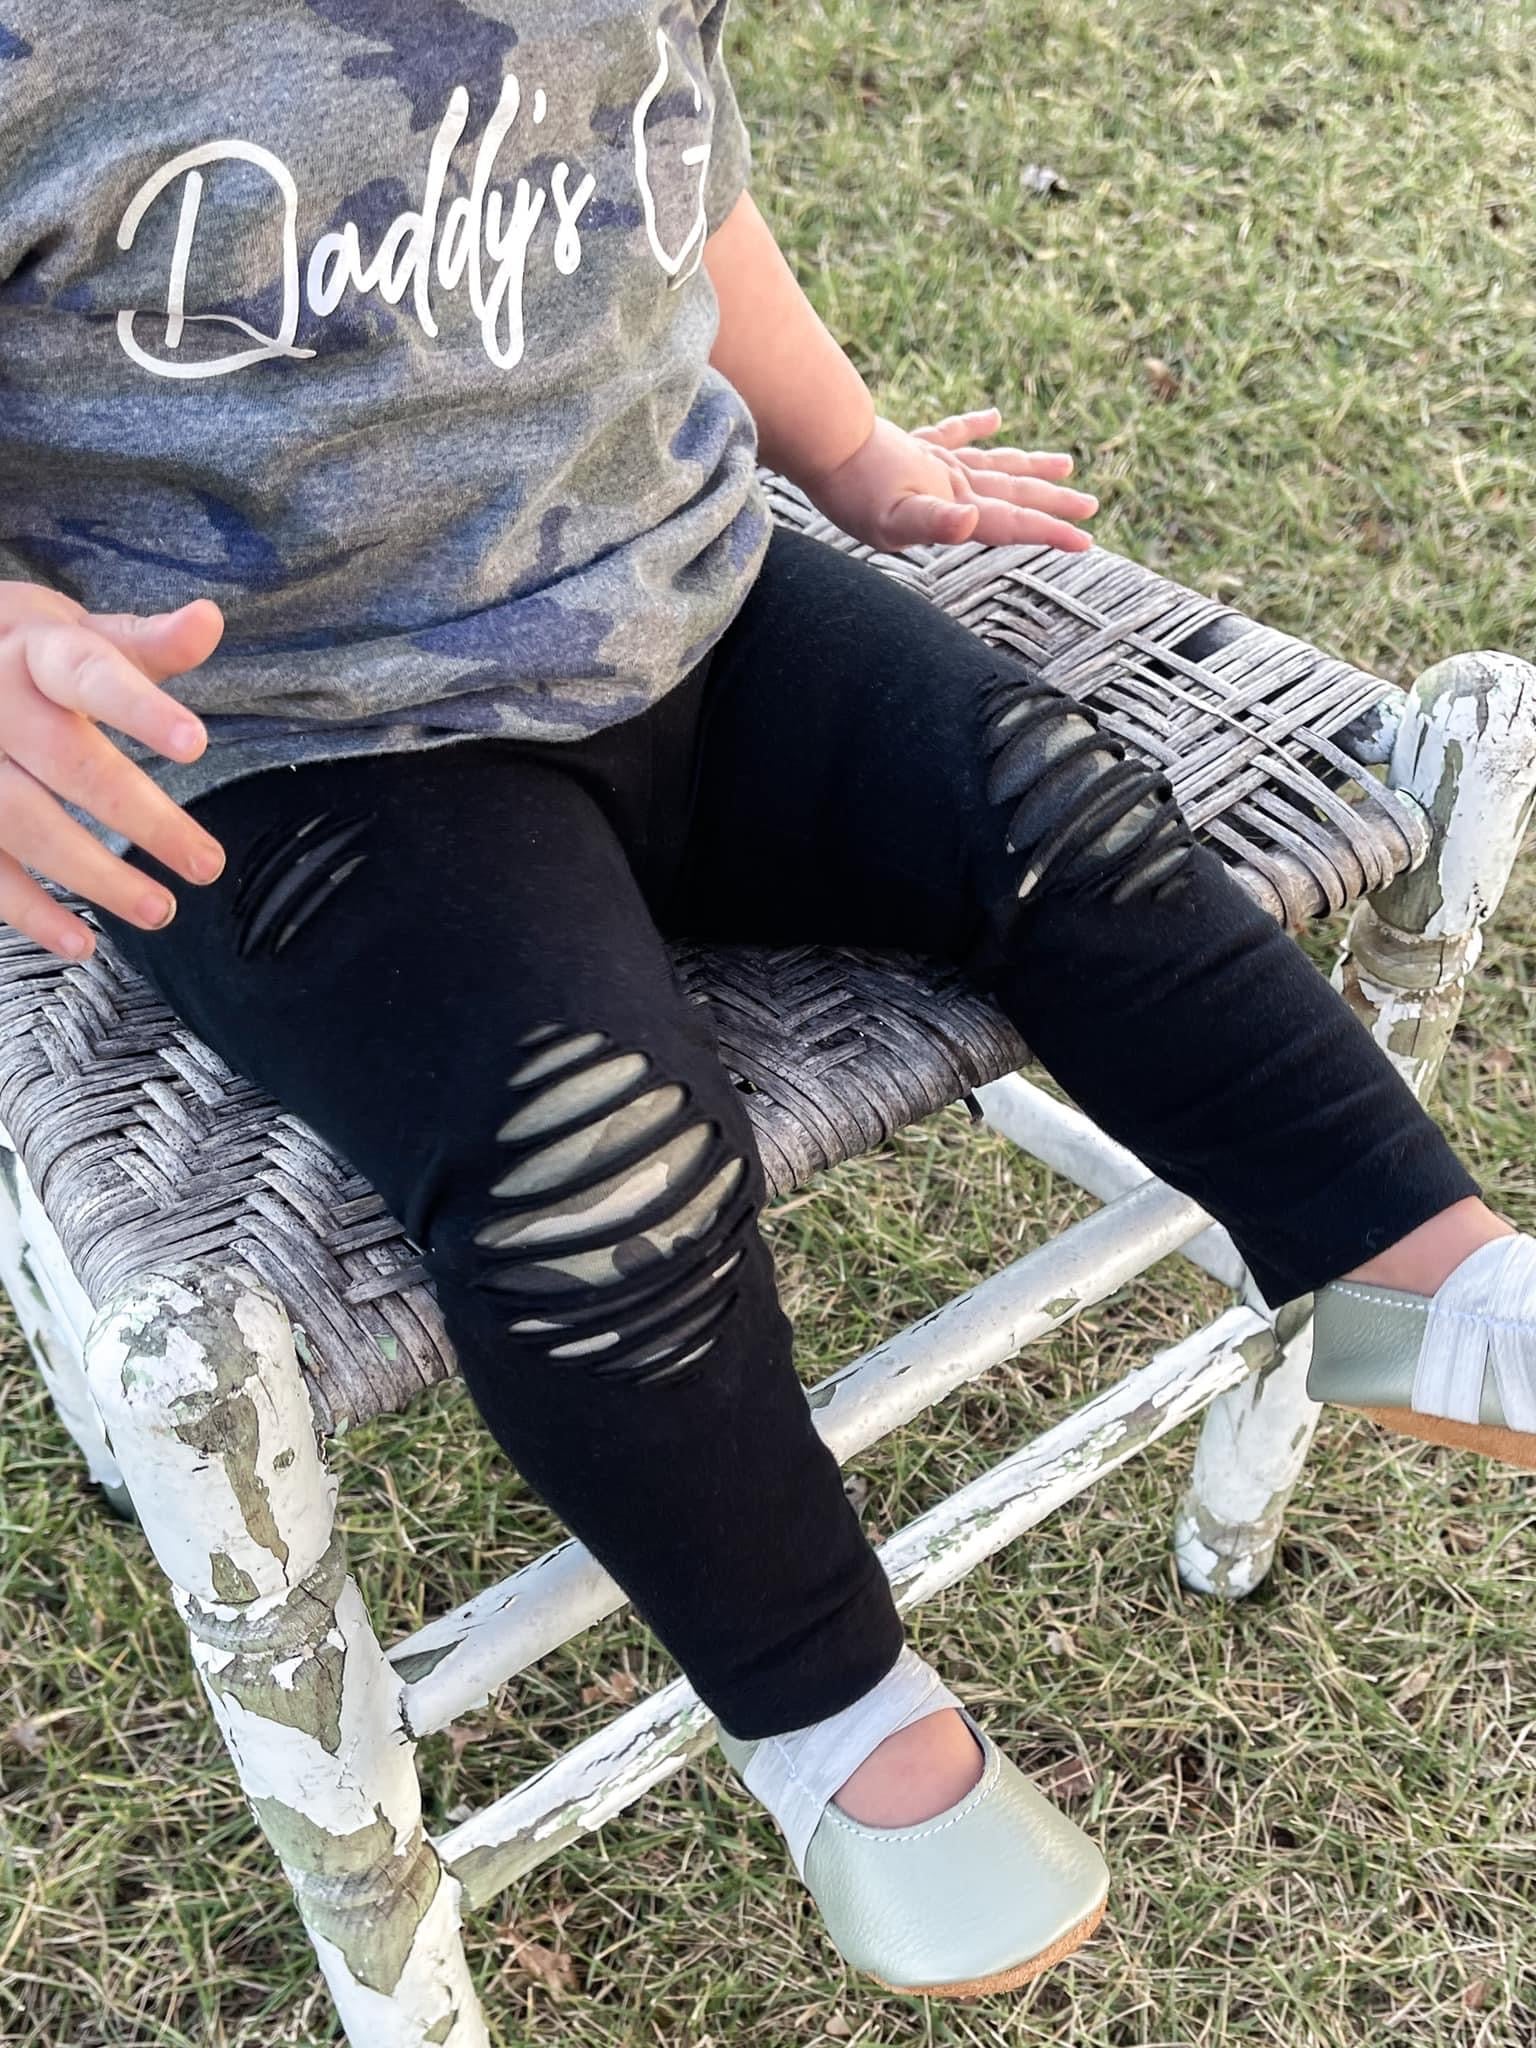 Camo Patched Shredded Leggings • 𝙋𝙧𝙚𝙤𝙧𝙙𝙚𝙧 • – Rustic Momma